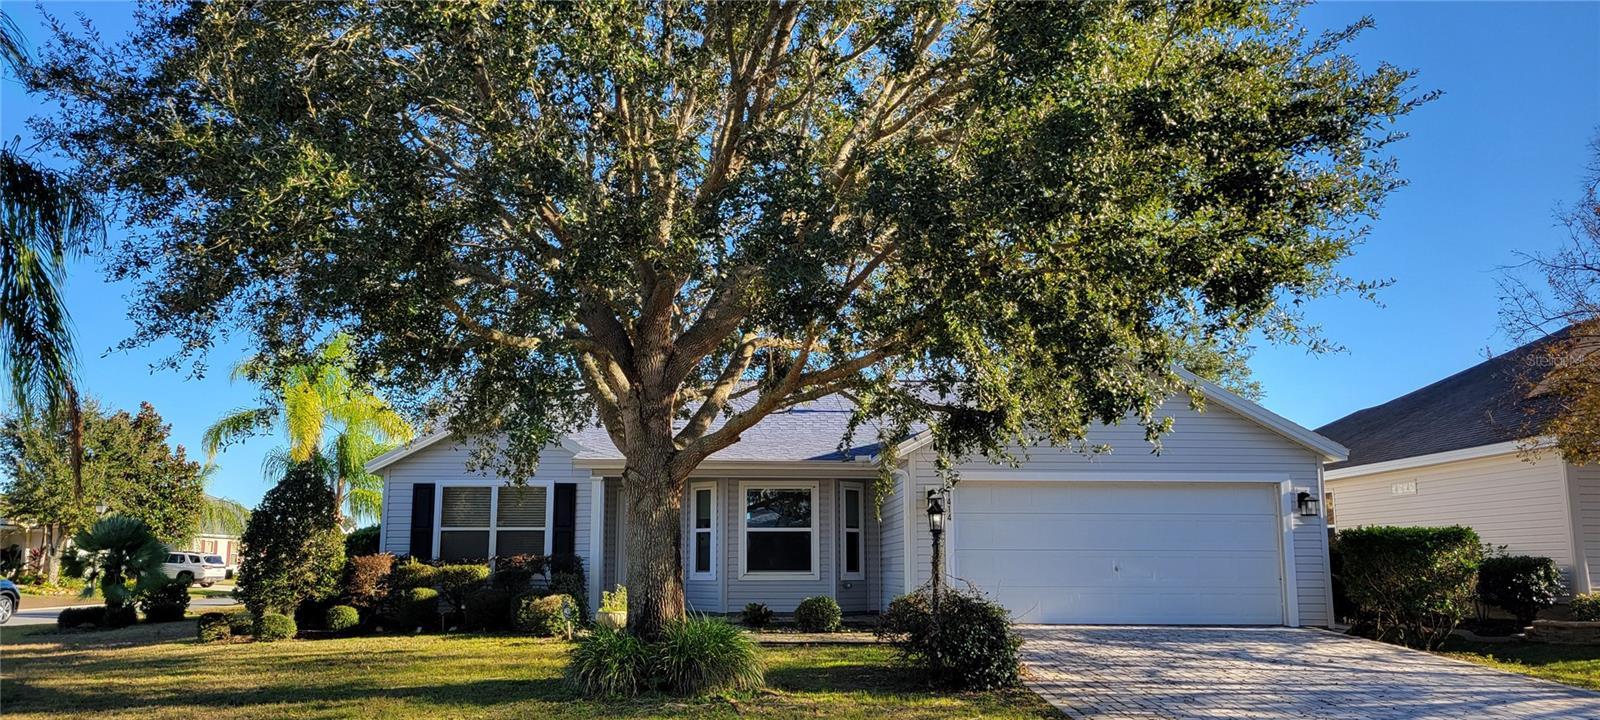 Photo one of 1414 Georgetown Ave The Villages FL 32162 | MLS V4933933